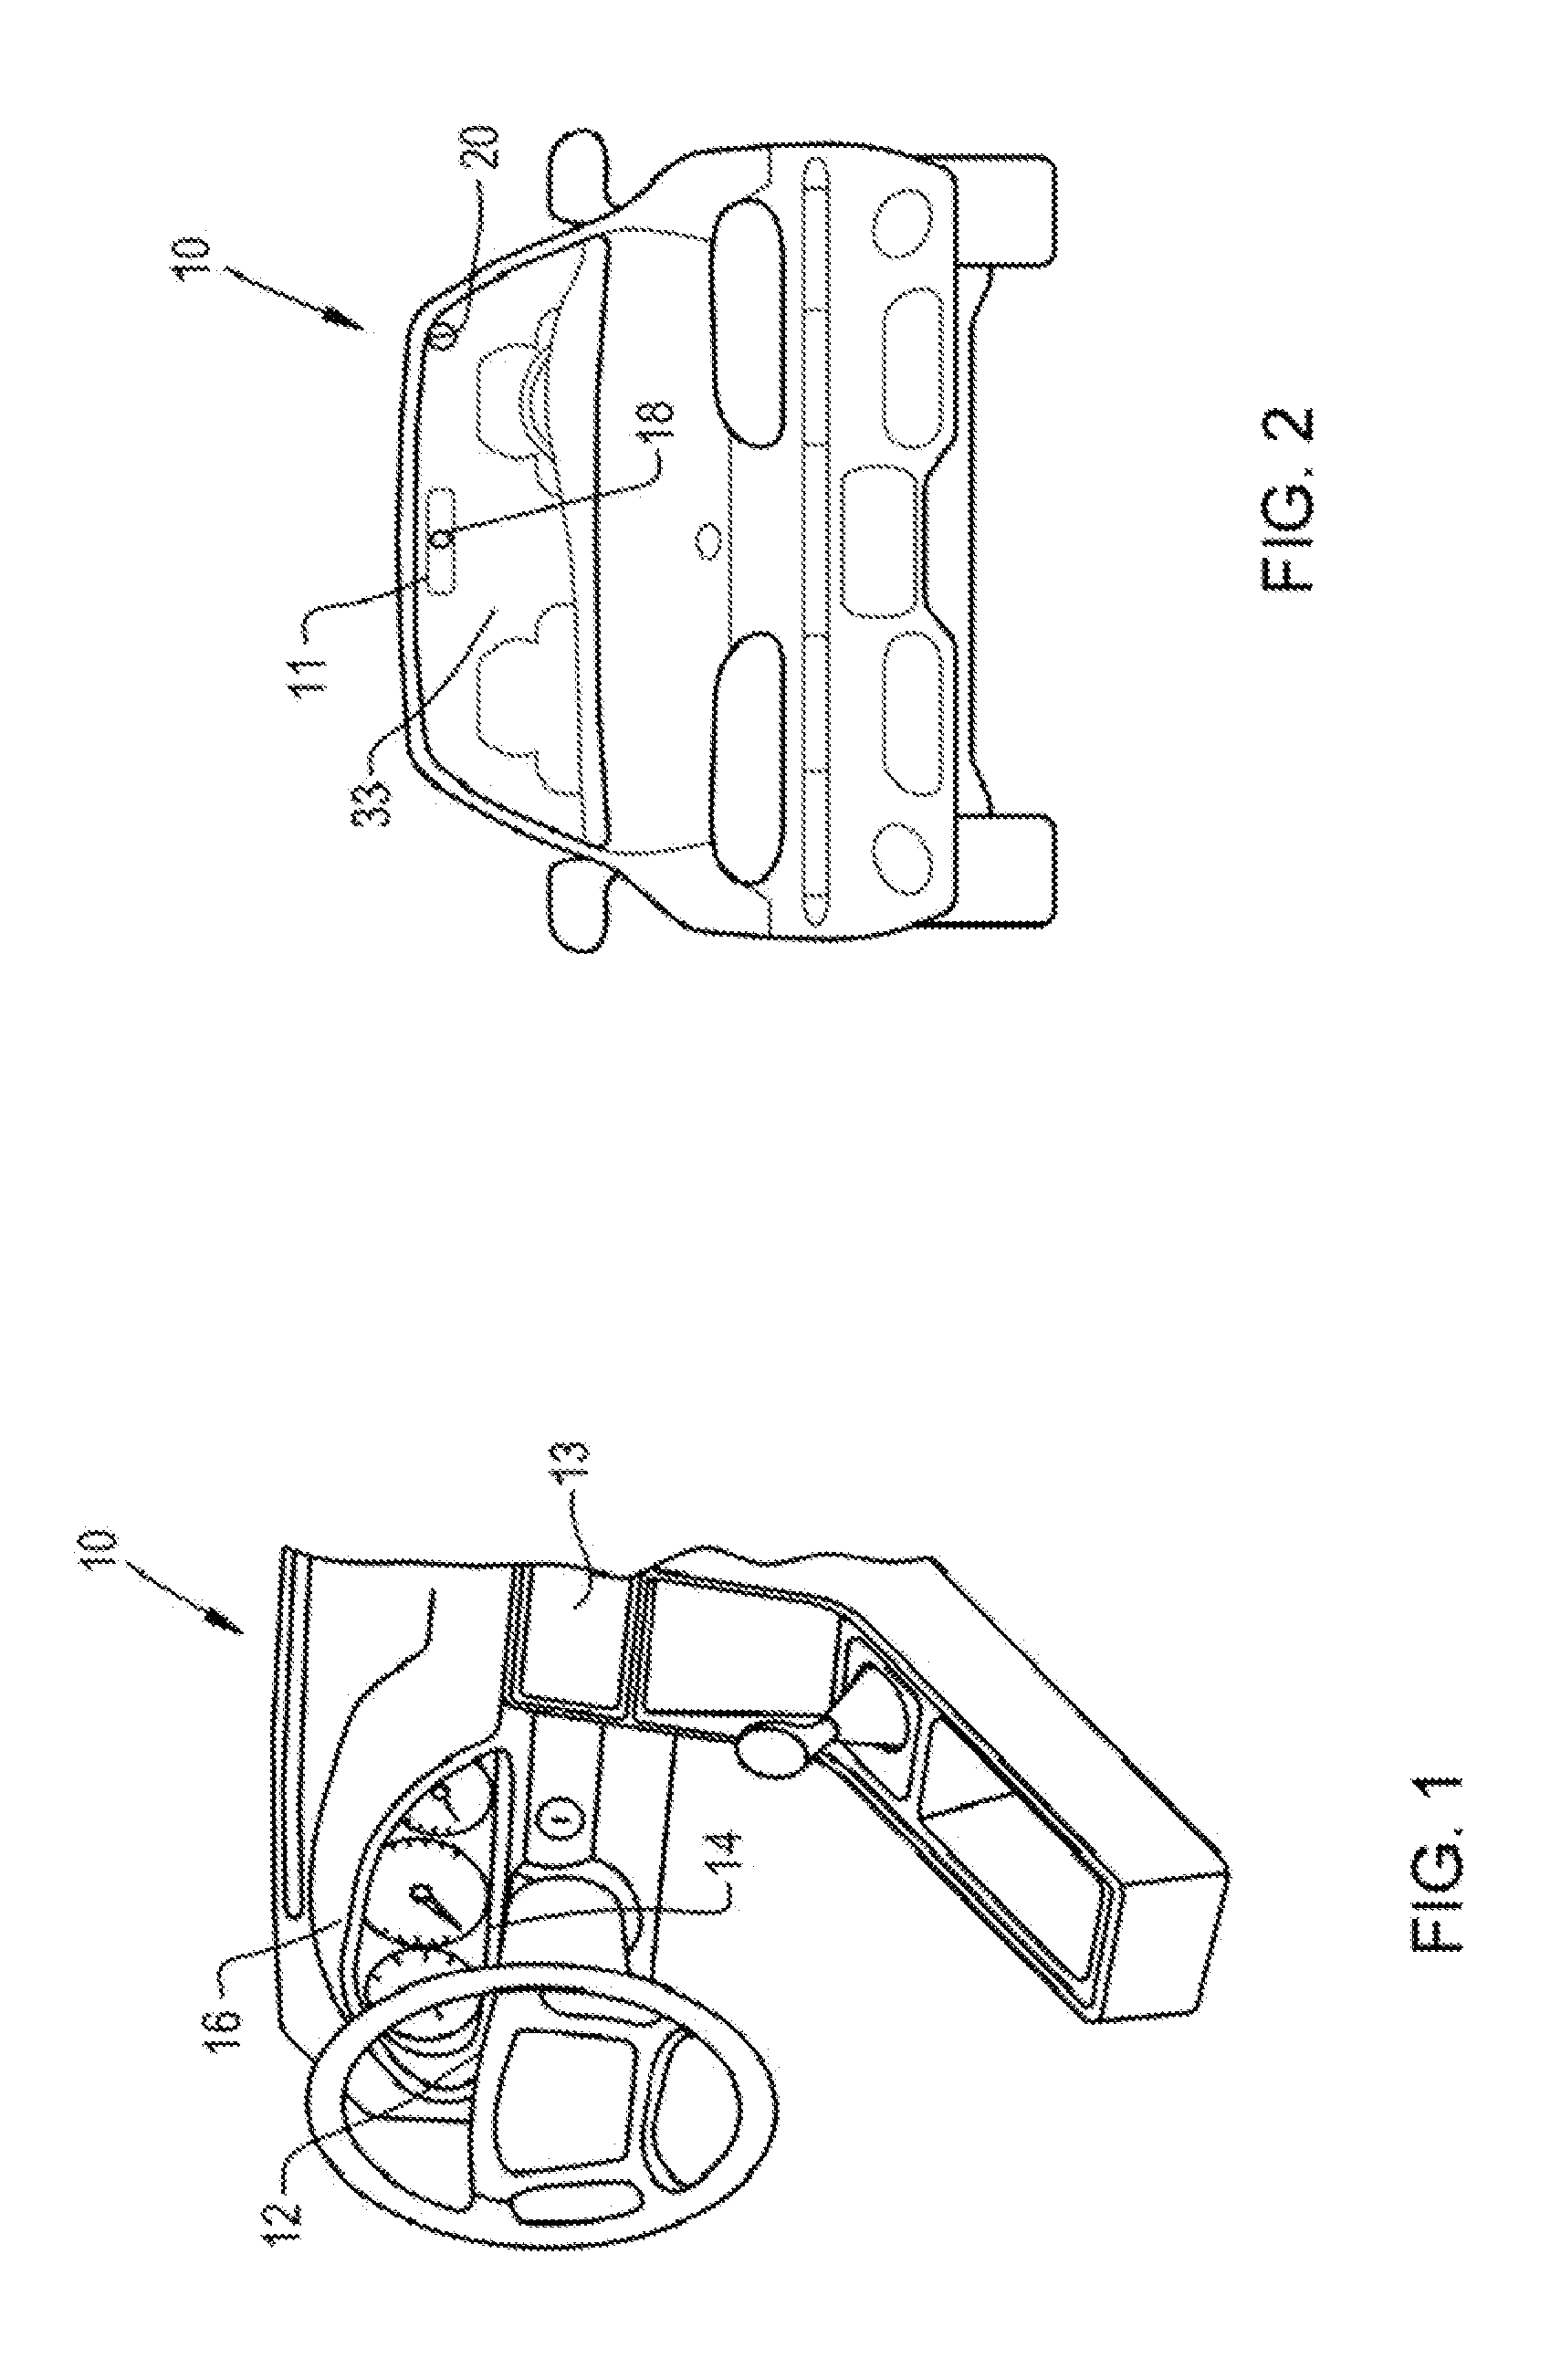 Driving assistance systems and methods